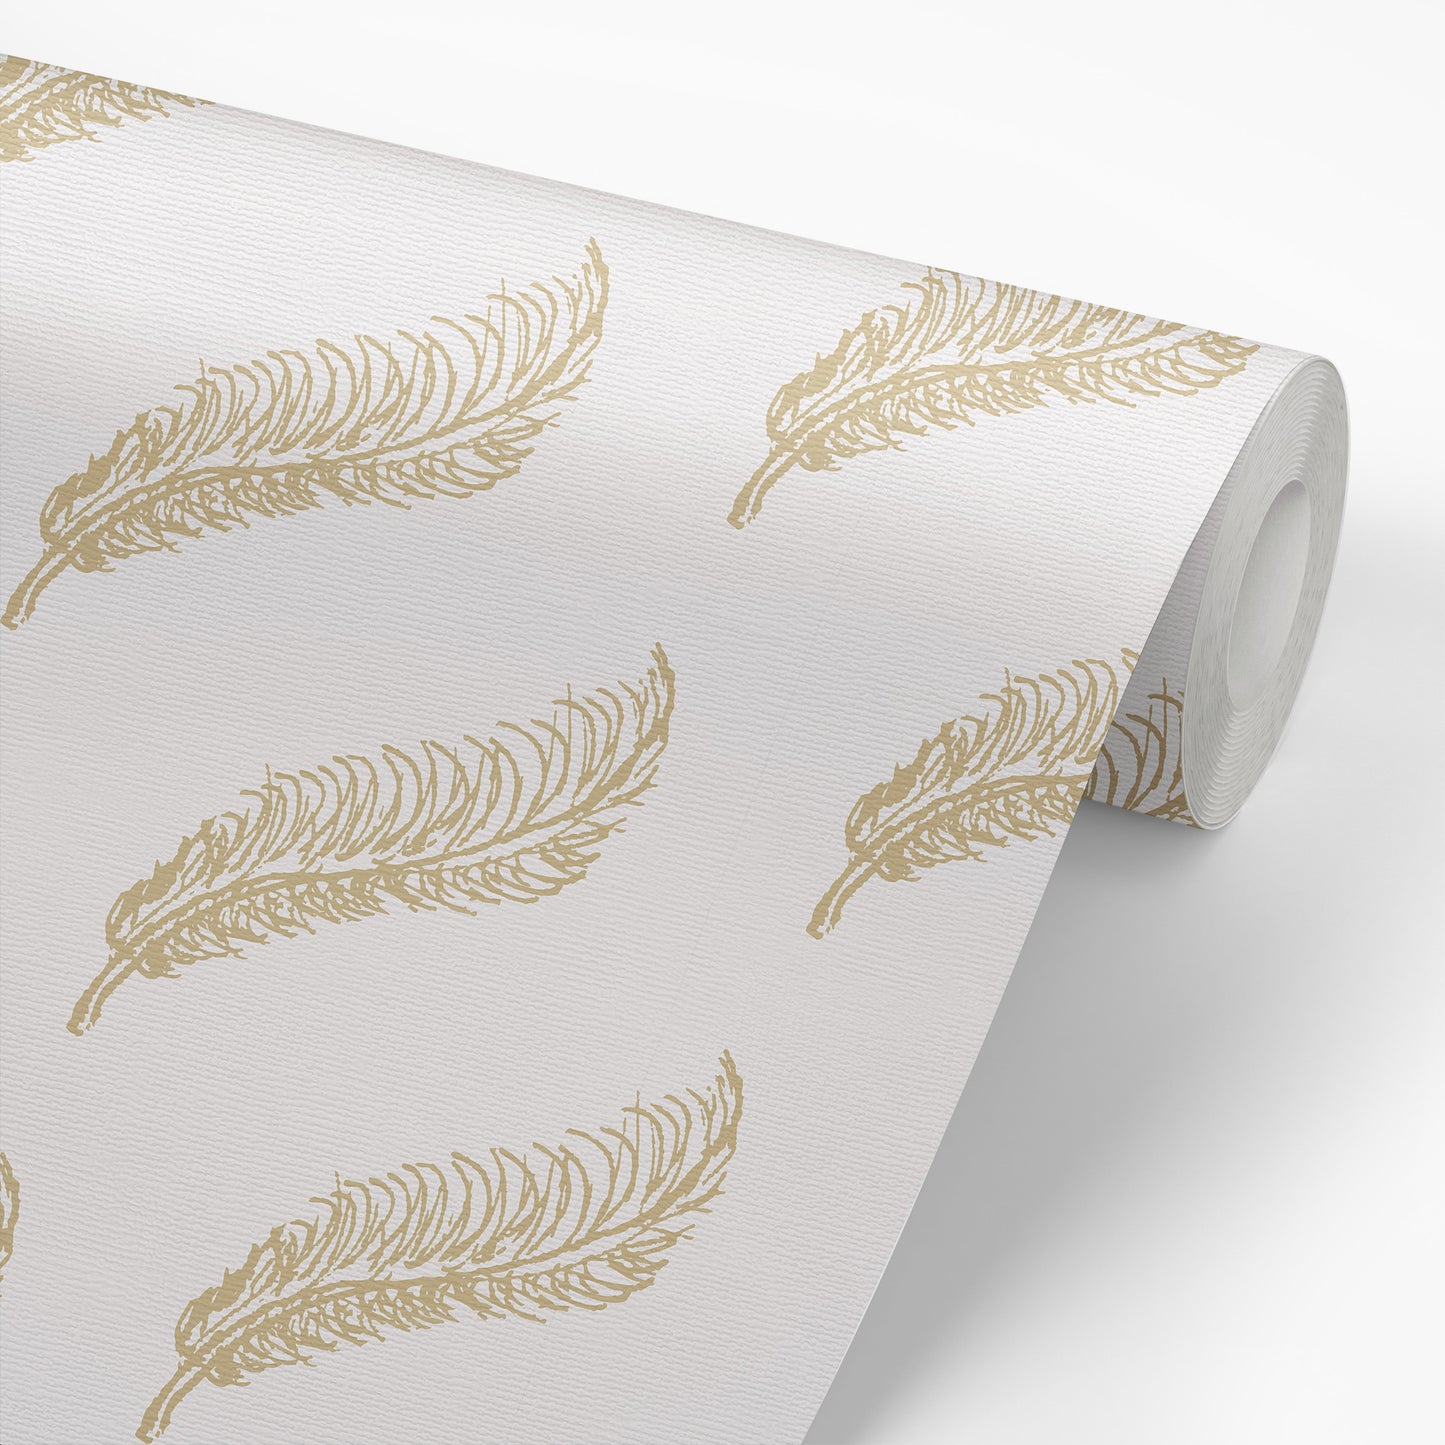 Feathers Wallpaper - White and Gold